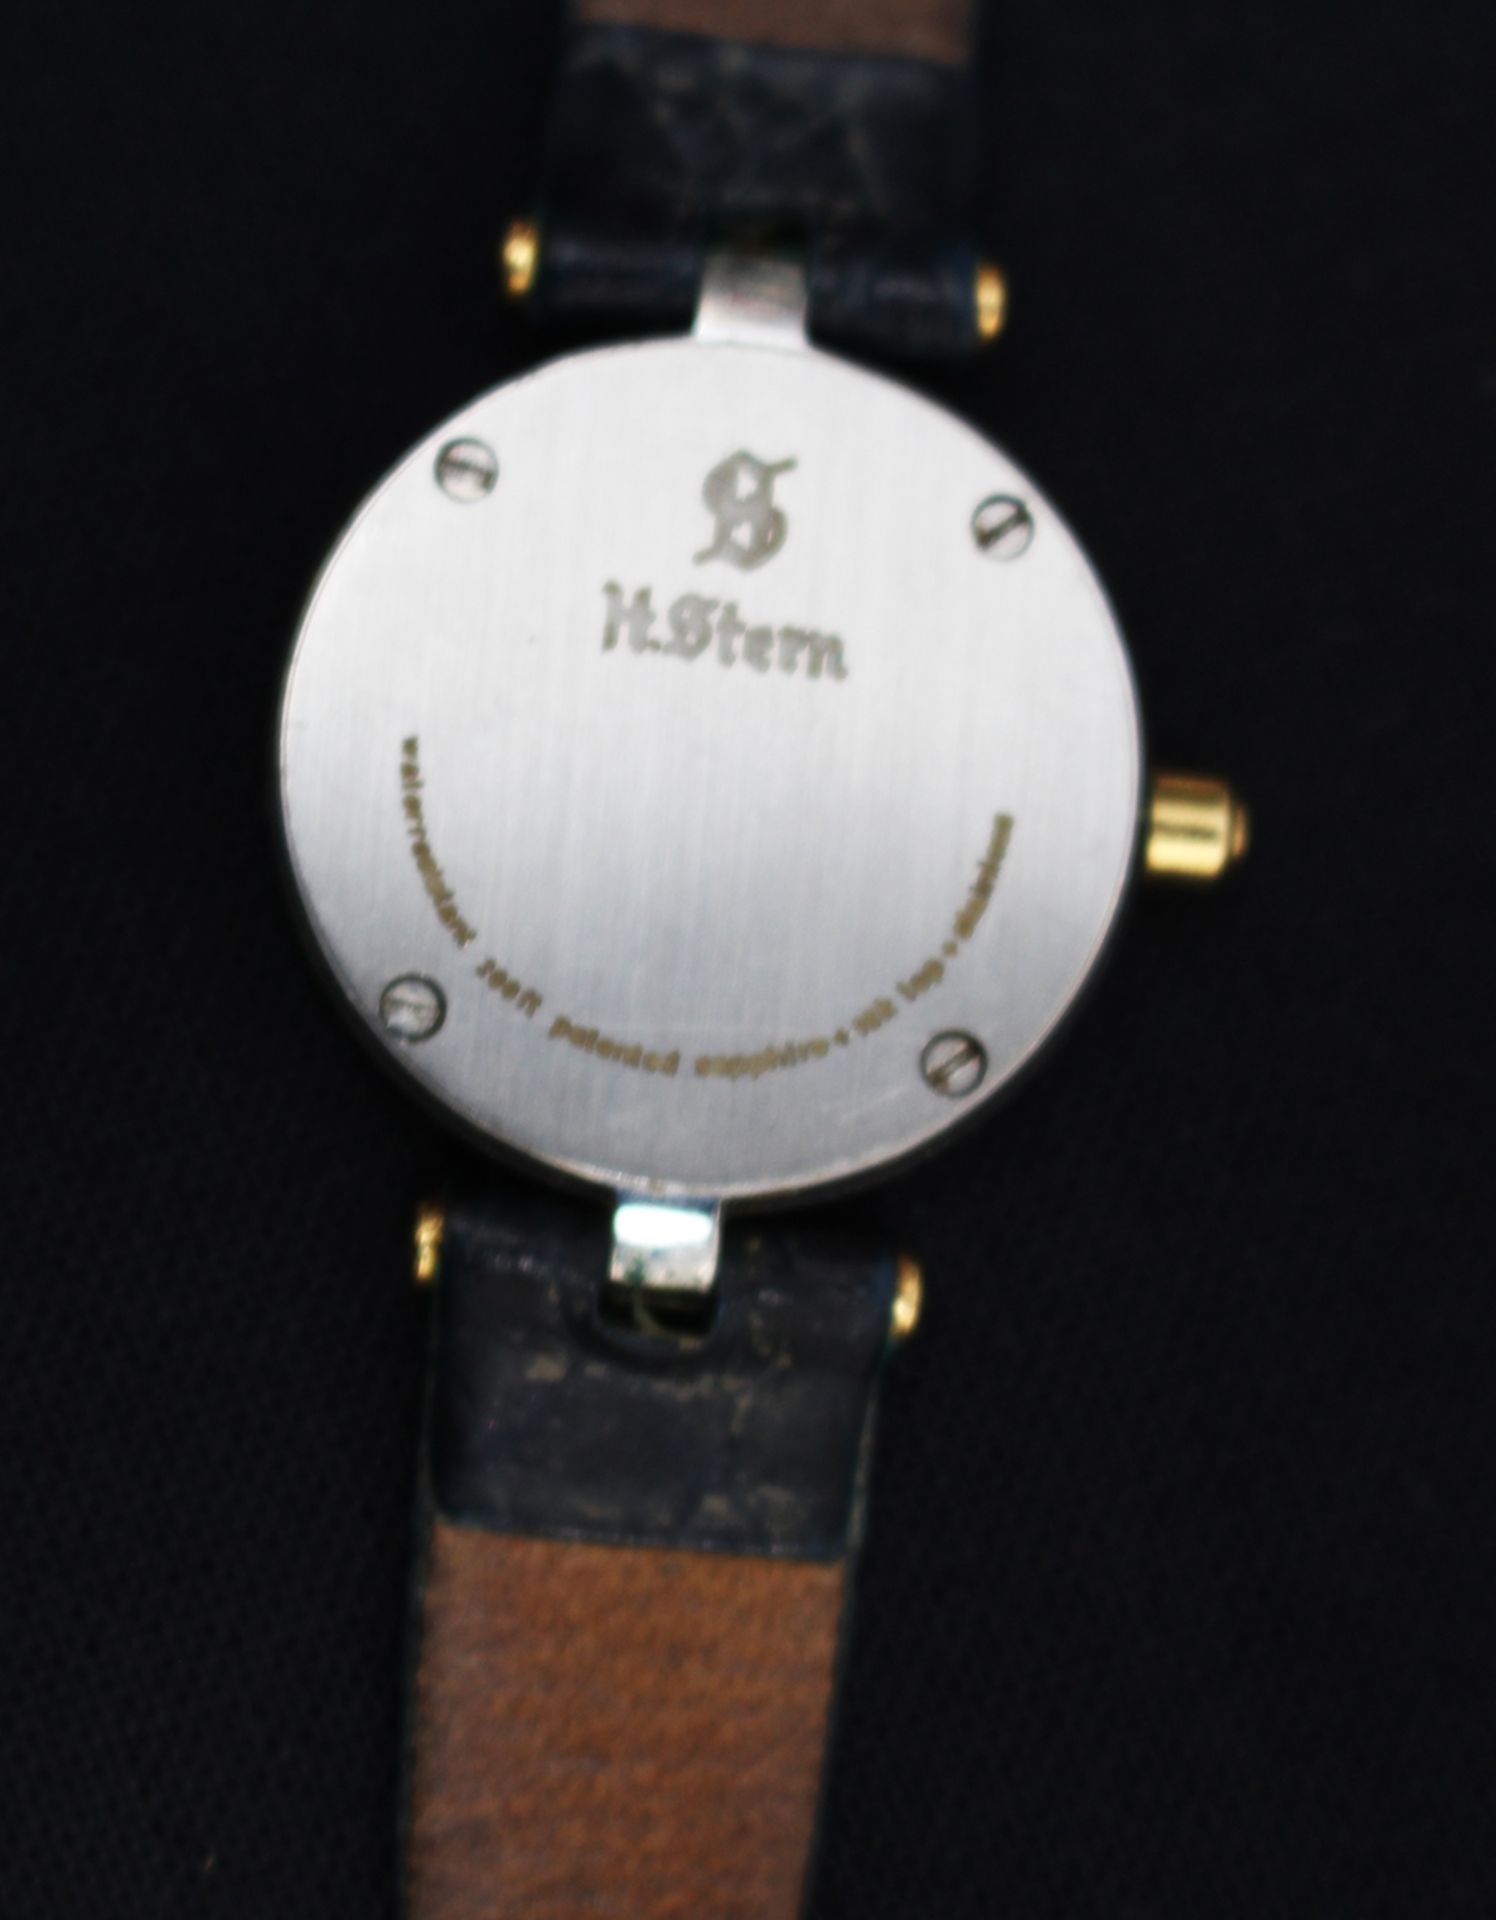 Ladys quartz watch , by H. Stern , function not proofed - Image 3 of 3